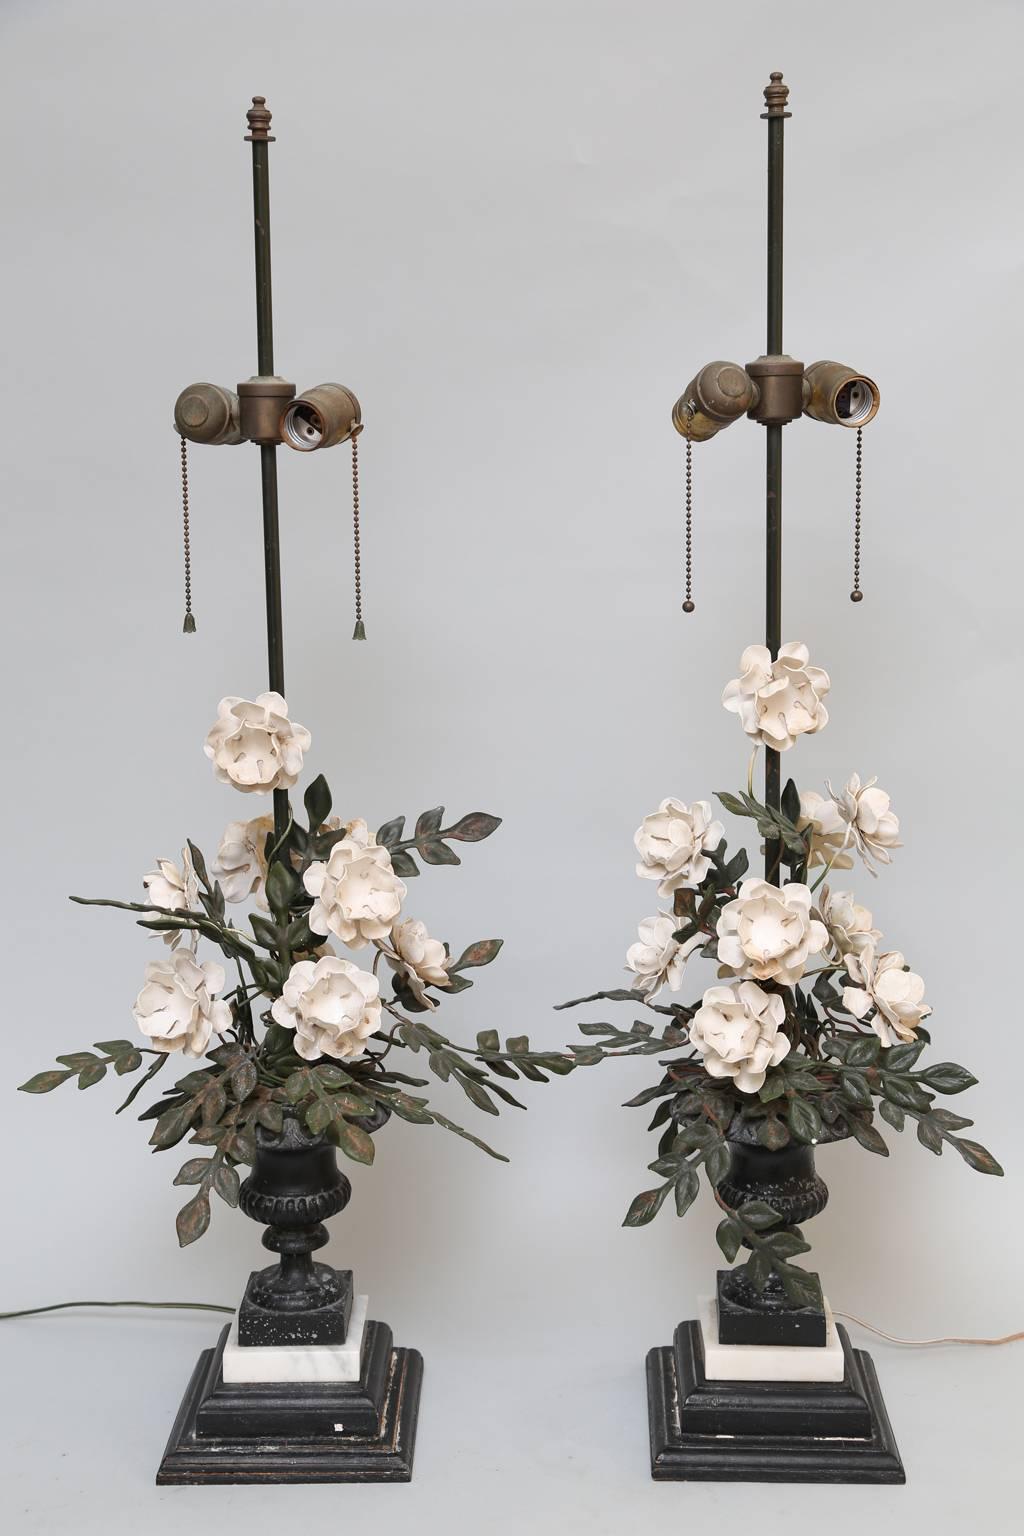 Pair of table lamps, each having a floral bouquet, of handwrought tole, fashioned as blooms and vines, inside a cast urn campana urn, on graduated square plinth. 

Stock ID: D1318.